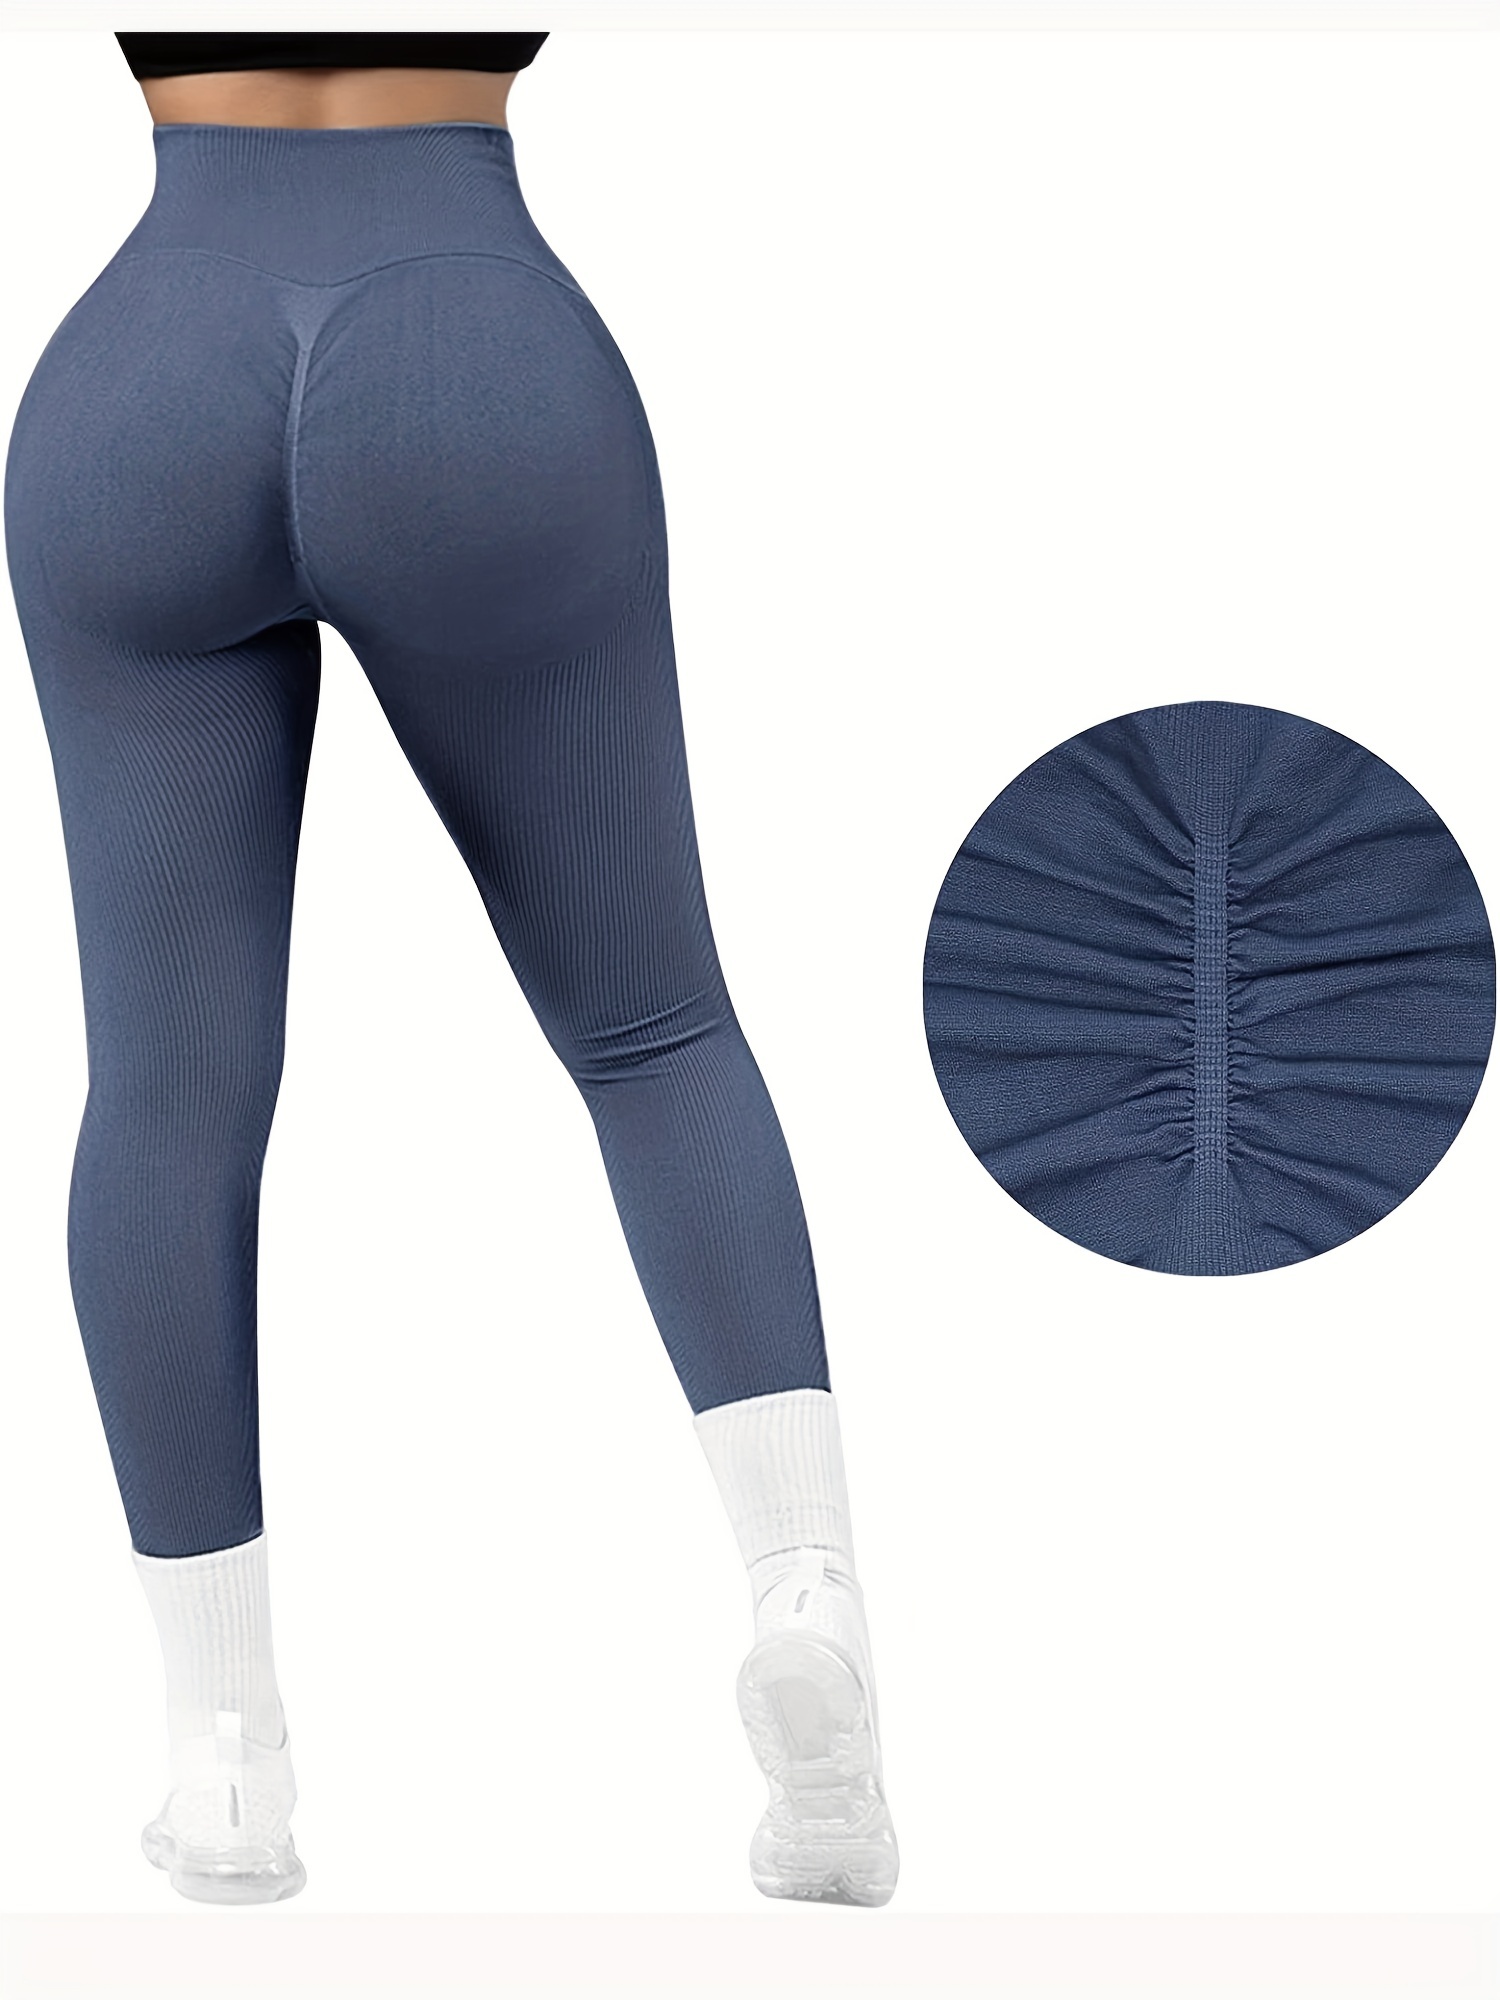 HSMQHJWE Wedgie Yoga Pants Women Hollow out Splice Tight Fitness